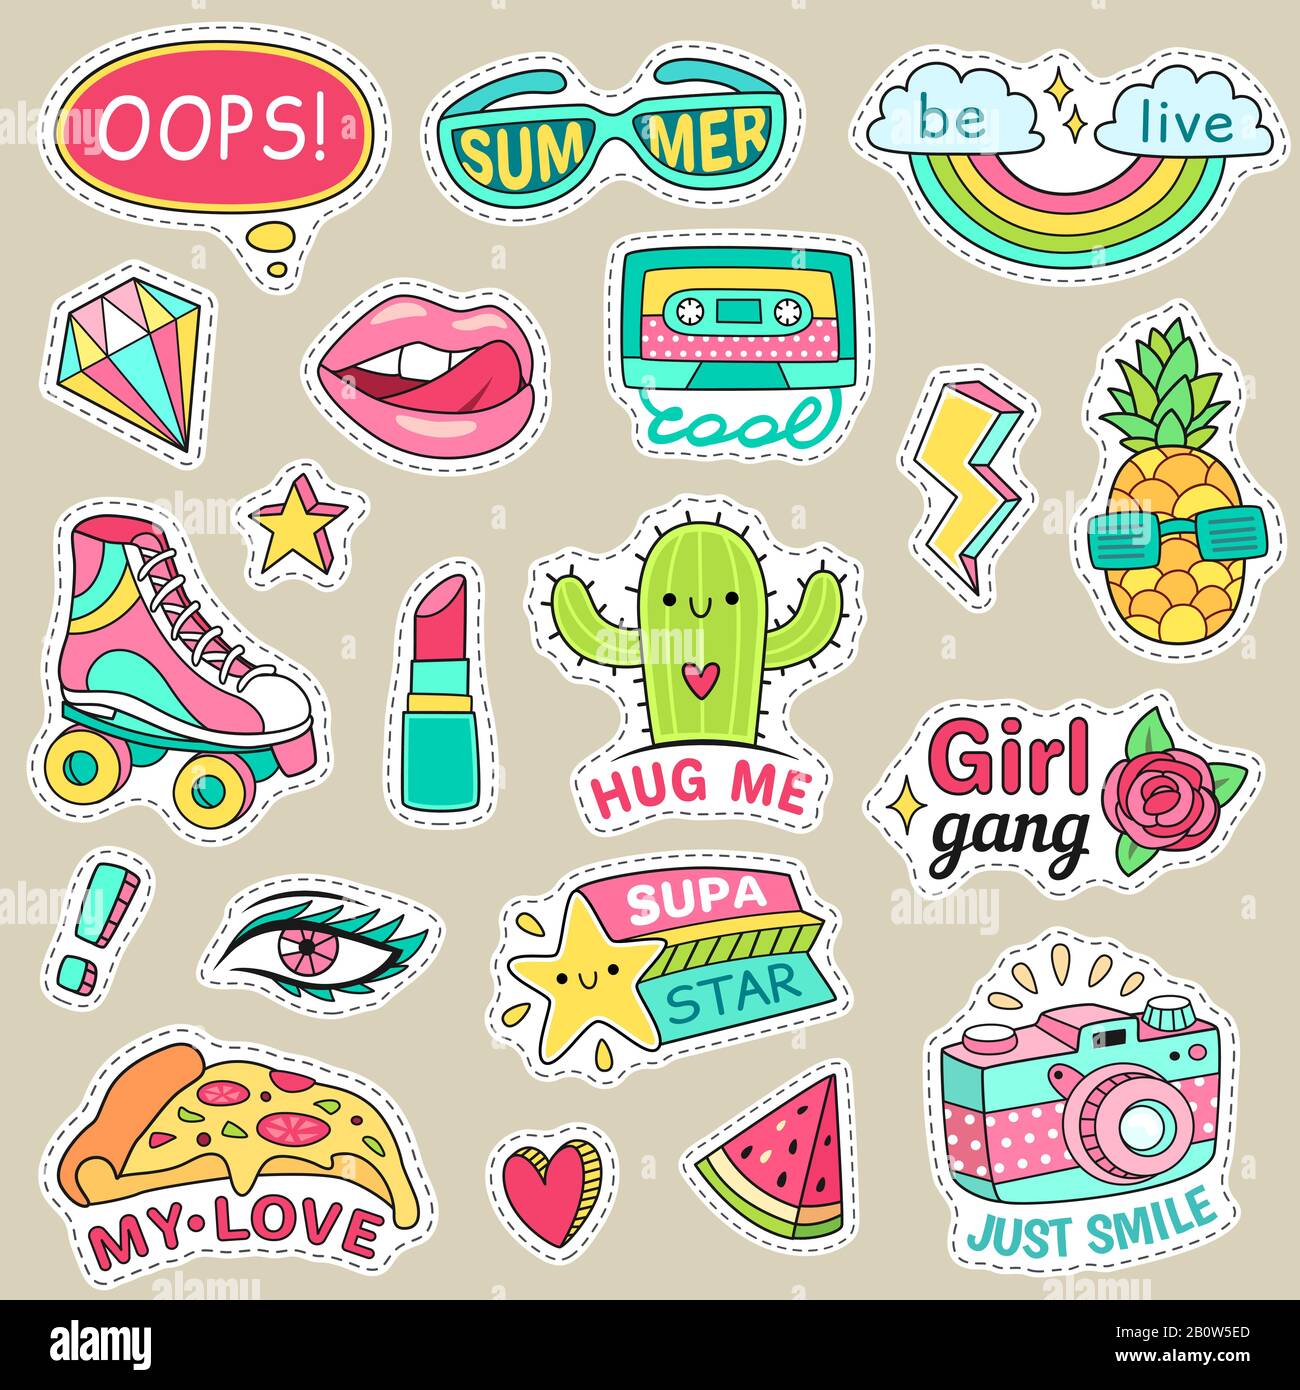 Fun fashion teenage stickers. Cute cartoons patches for teenager. Sticker pack vector illustration set Stock Vector